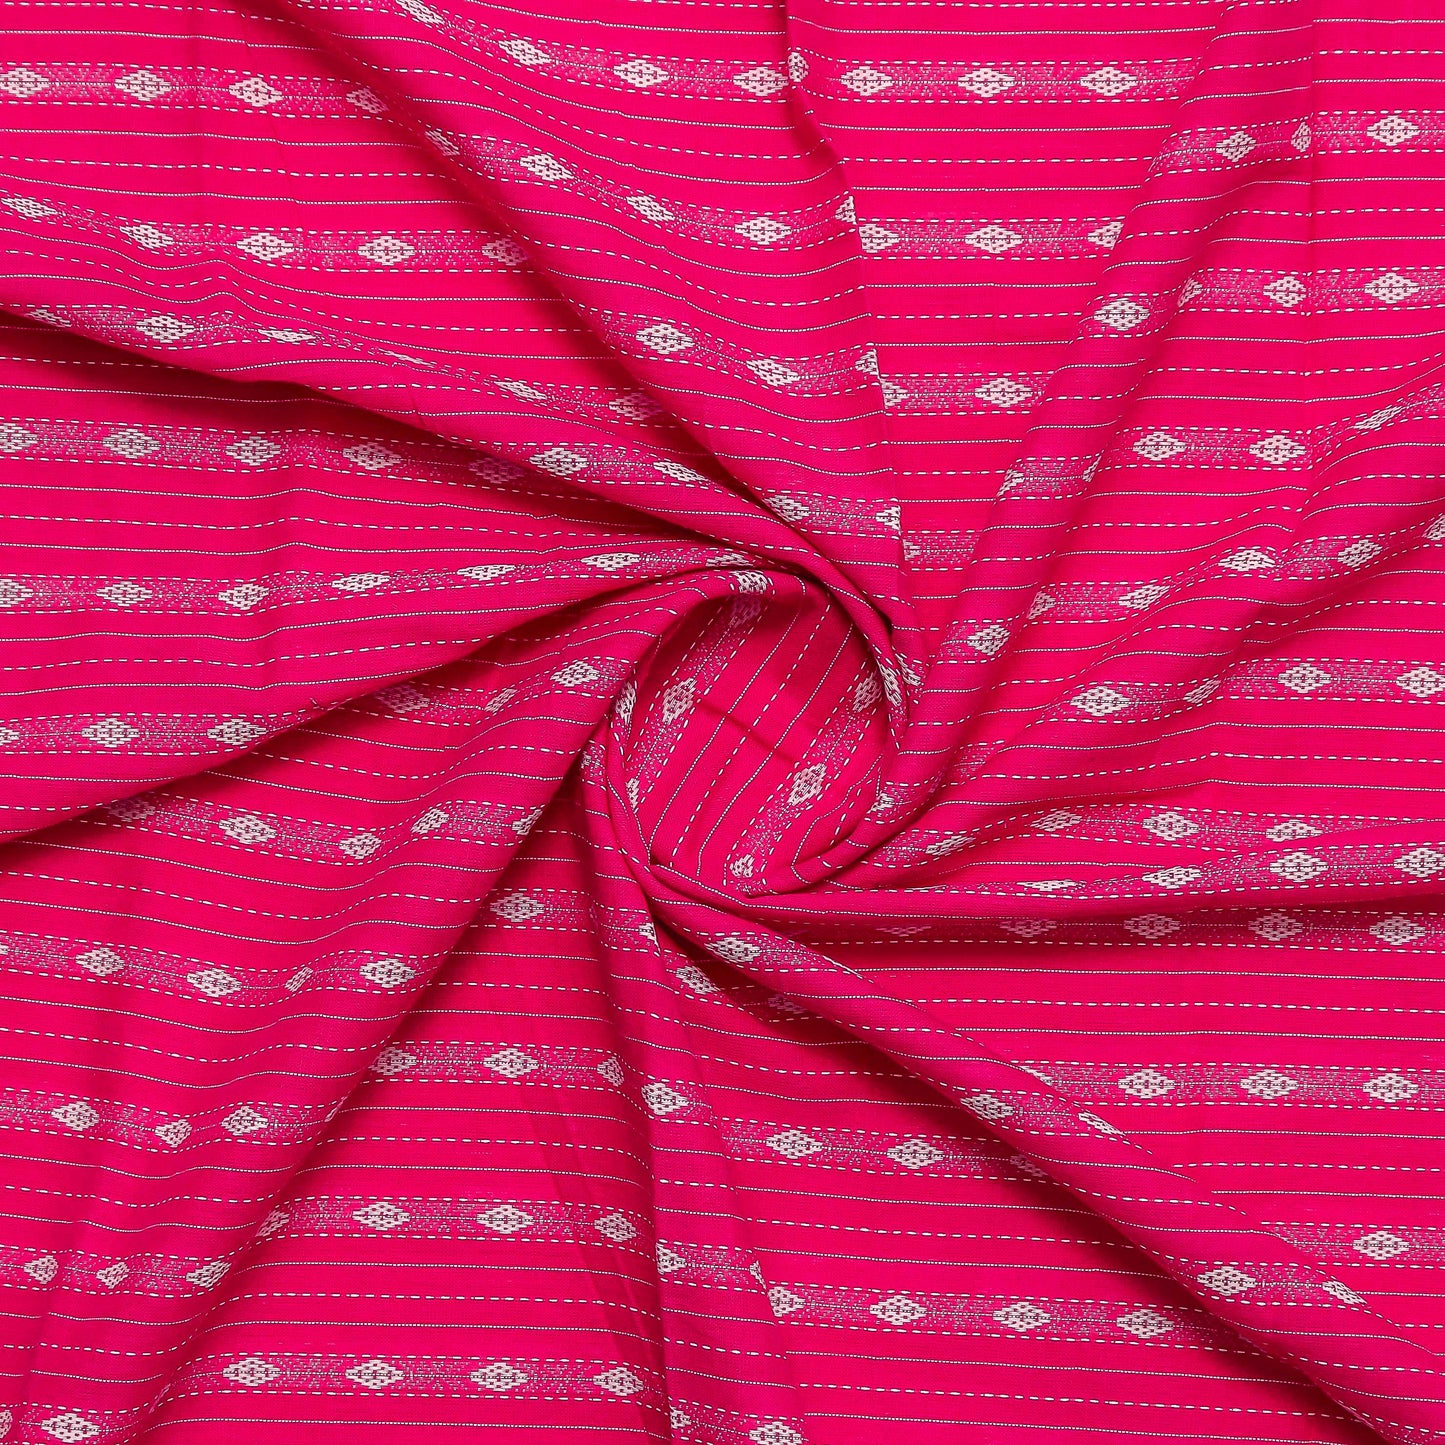 Hot Pink Pure Cotton Kantha Work Kurta Fabric (2.5 Meters) | and Plain Dyed Cotton Pyjama (2.5 Meters) | Unstitched Combo Set